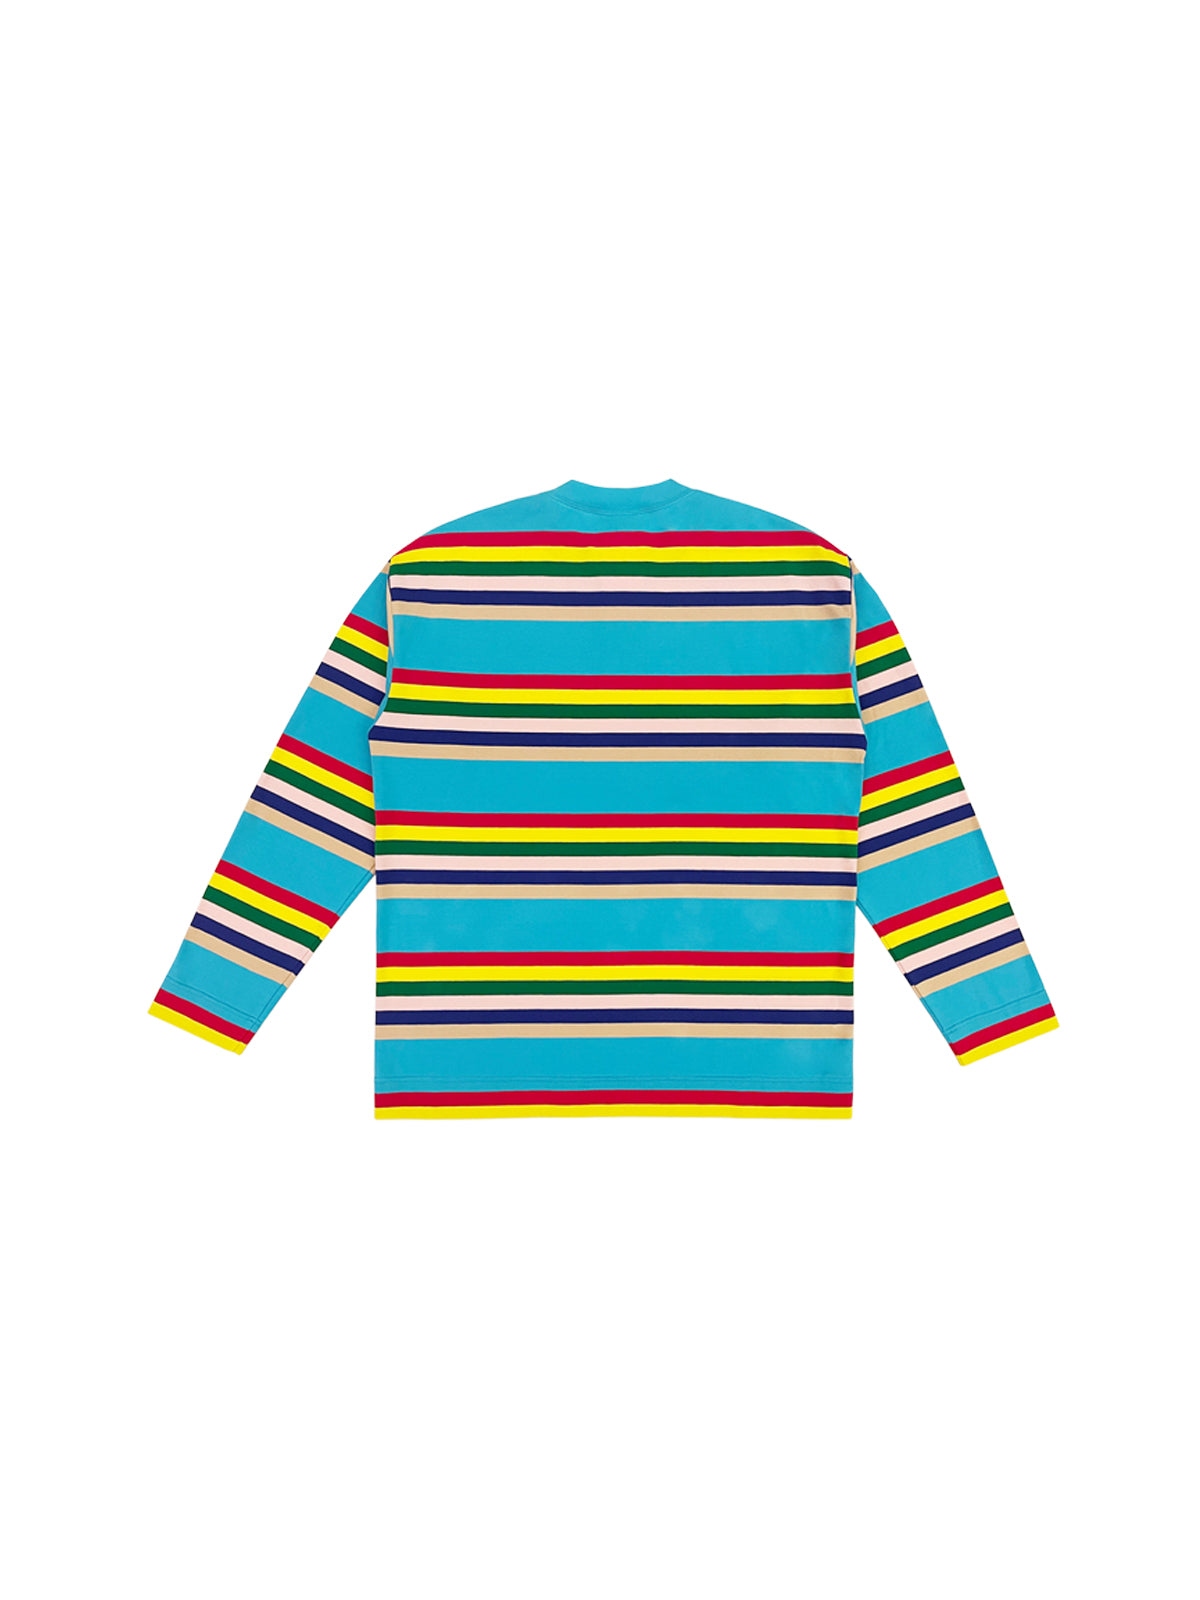 [ 517 LOVE WINS PROJECT ] BLUE COLORFUL RAINBOW LONG SLEEVES SHIRT